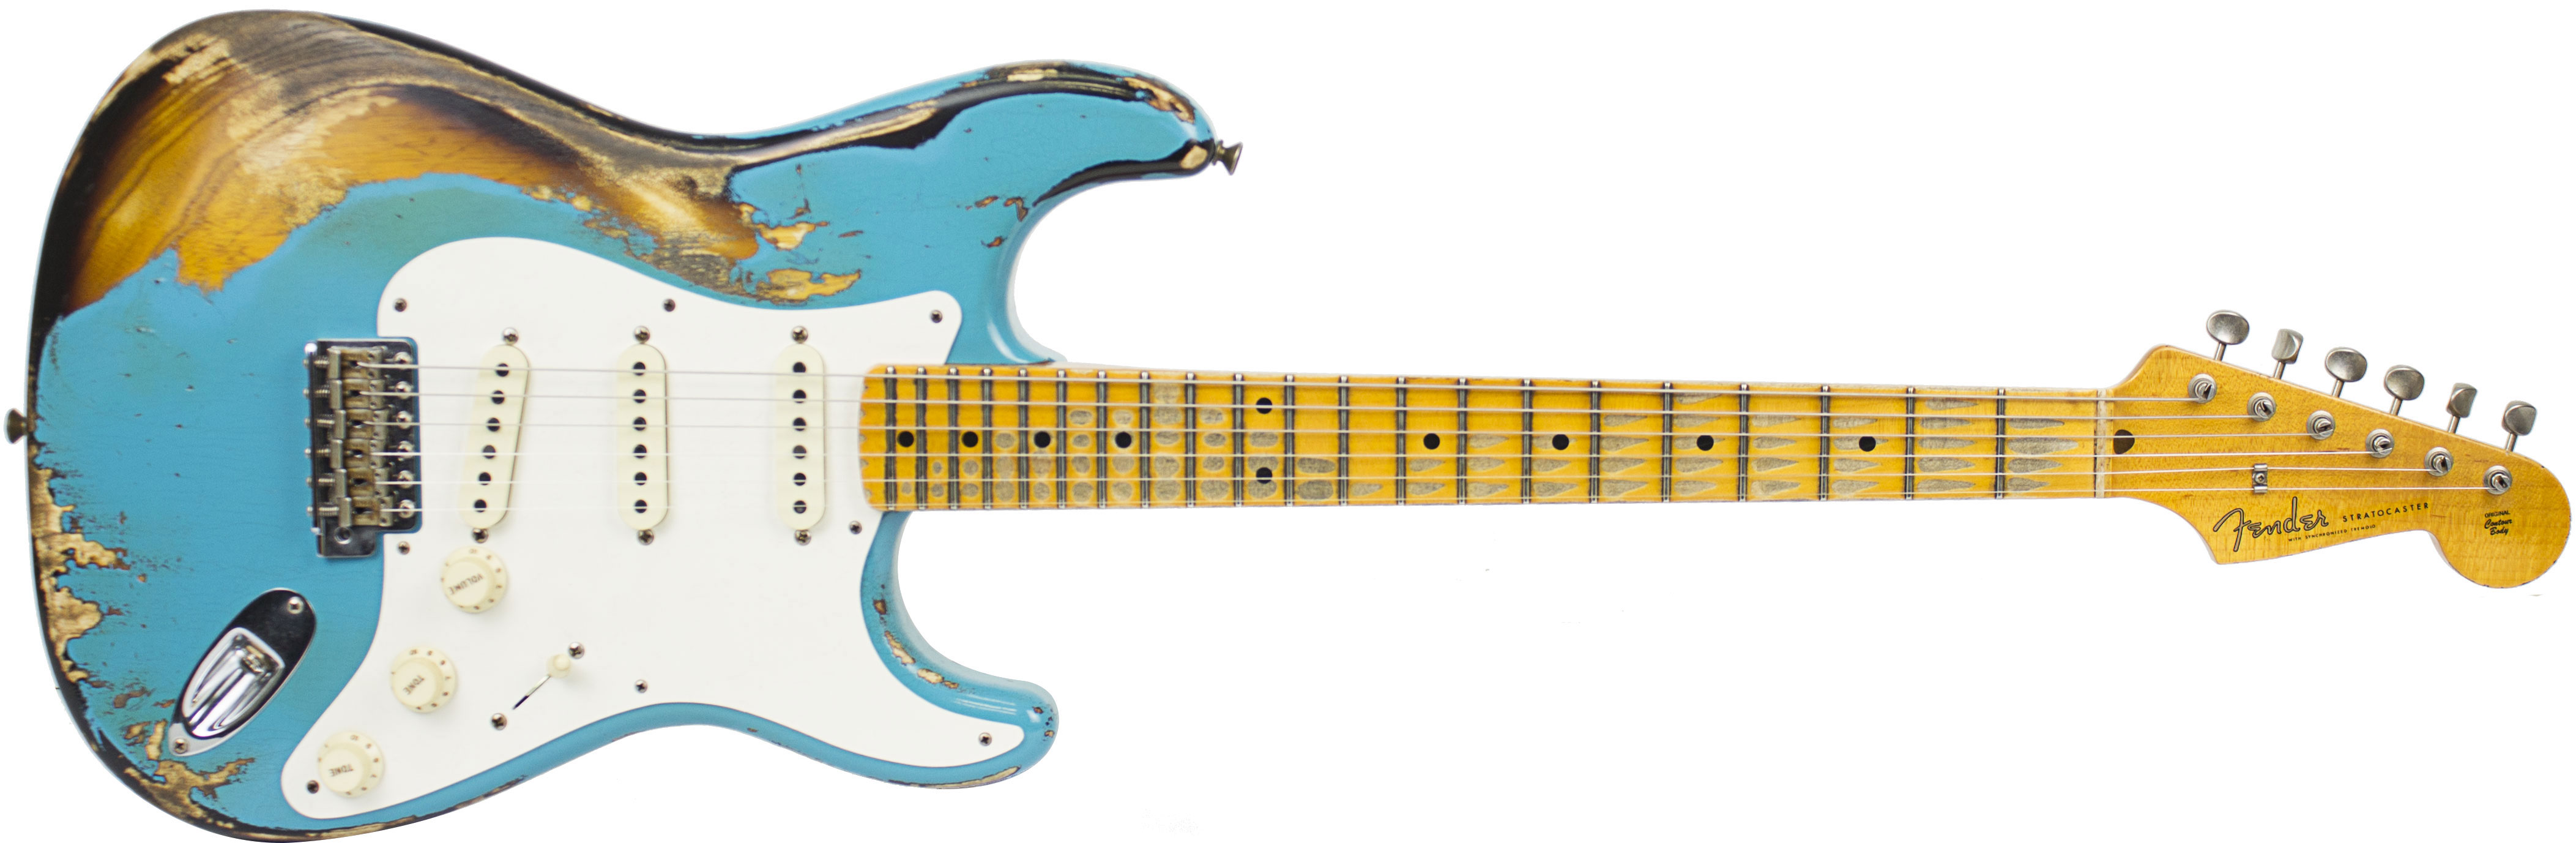 GUITARRA FENDER 57 STRATOCASTER HEAVY RELIC LTD EDITION 923-1009-547 TAOS TURQUOISE OVER 2-TS